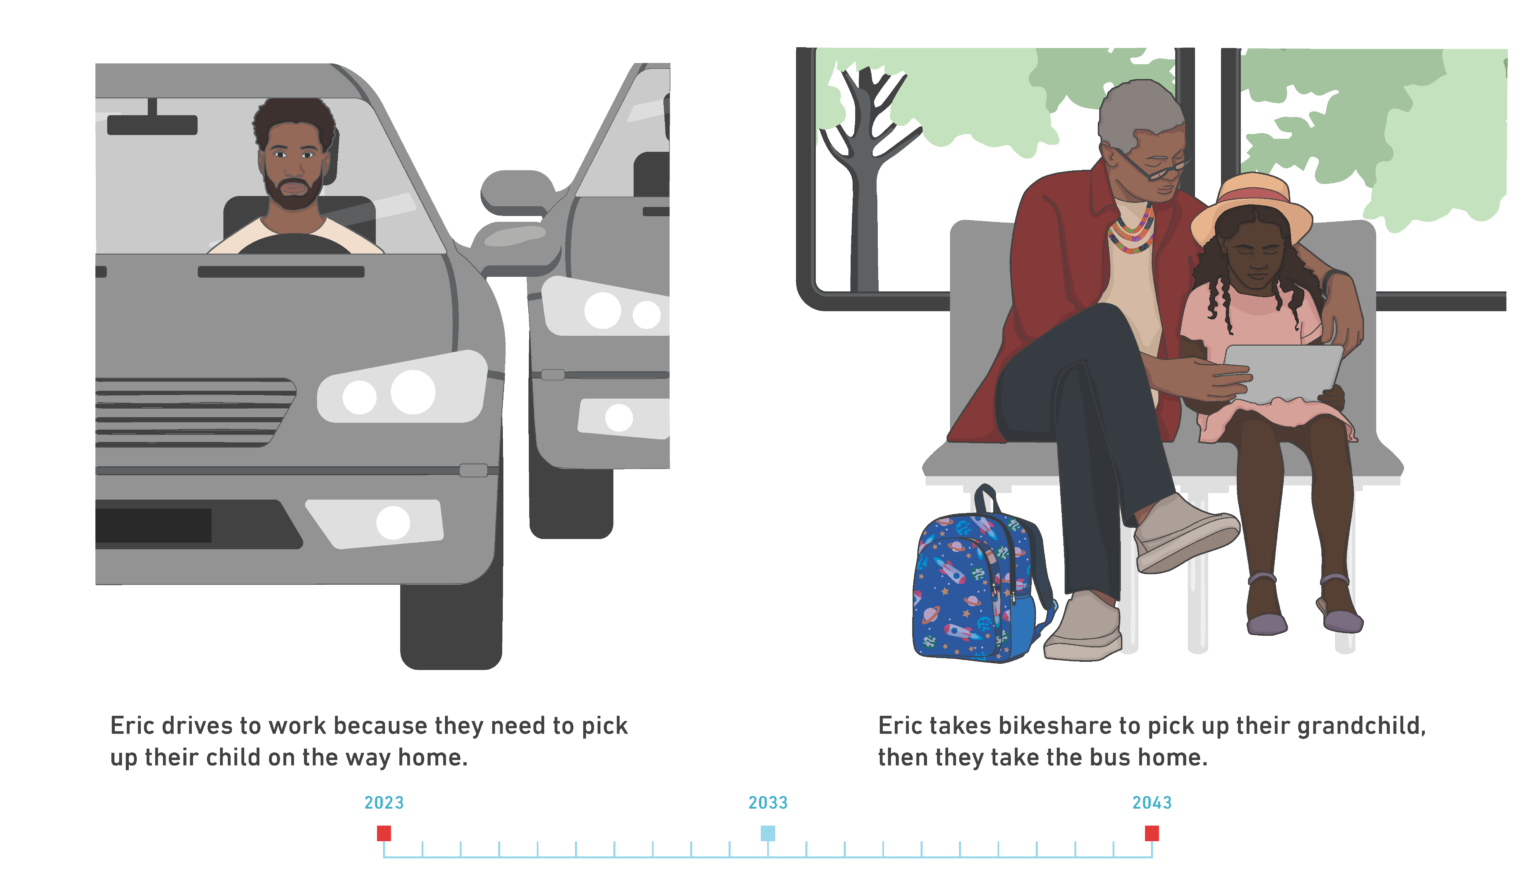 Side-by-side graphic showing a person sitting in traffic in 2023 and that same person riding the bus with their grandchild in 2043